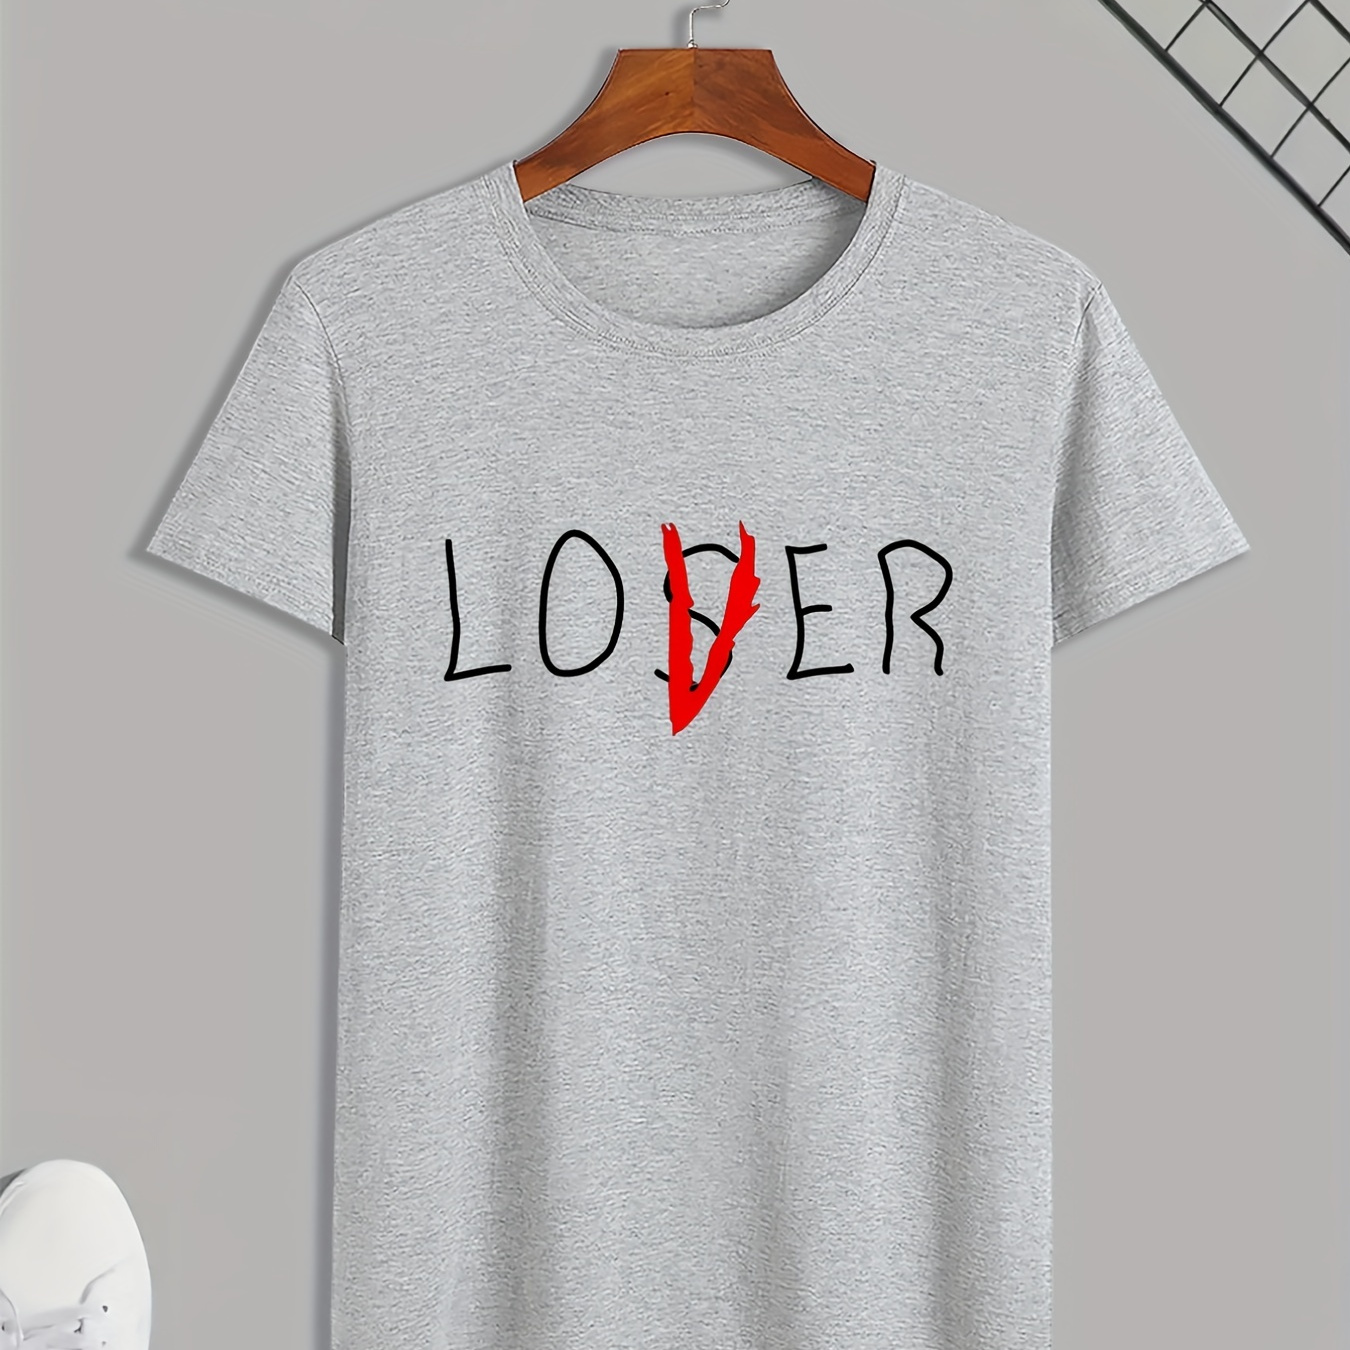 

Men's Lover Print Tee - Comfy & Casual Slightly Stretch Crew Neck Tee Top For Summer Outdoor Wear